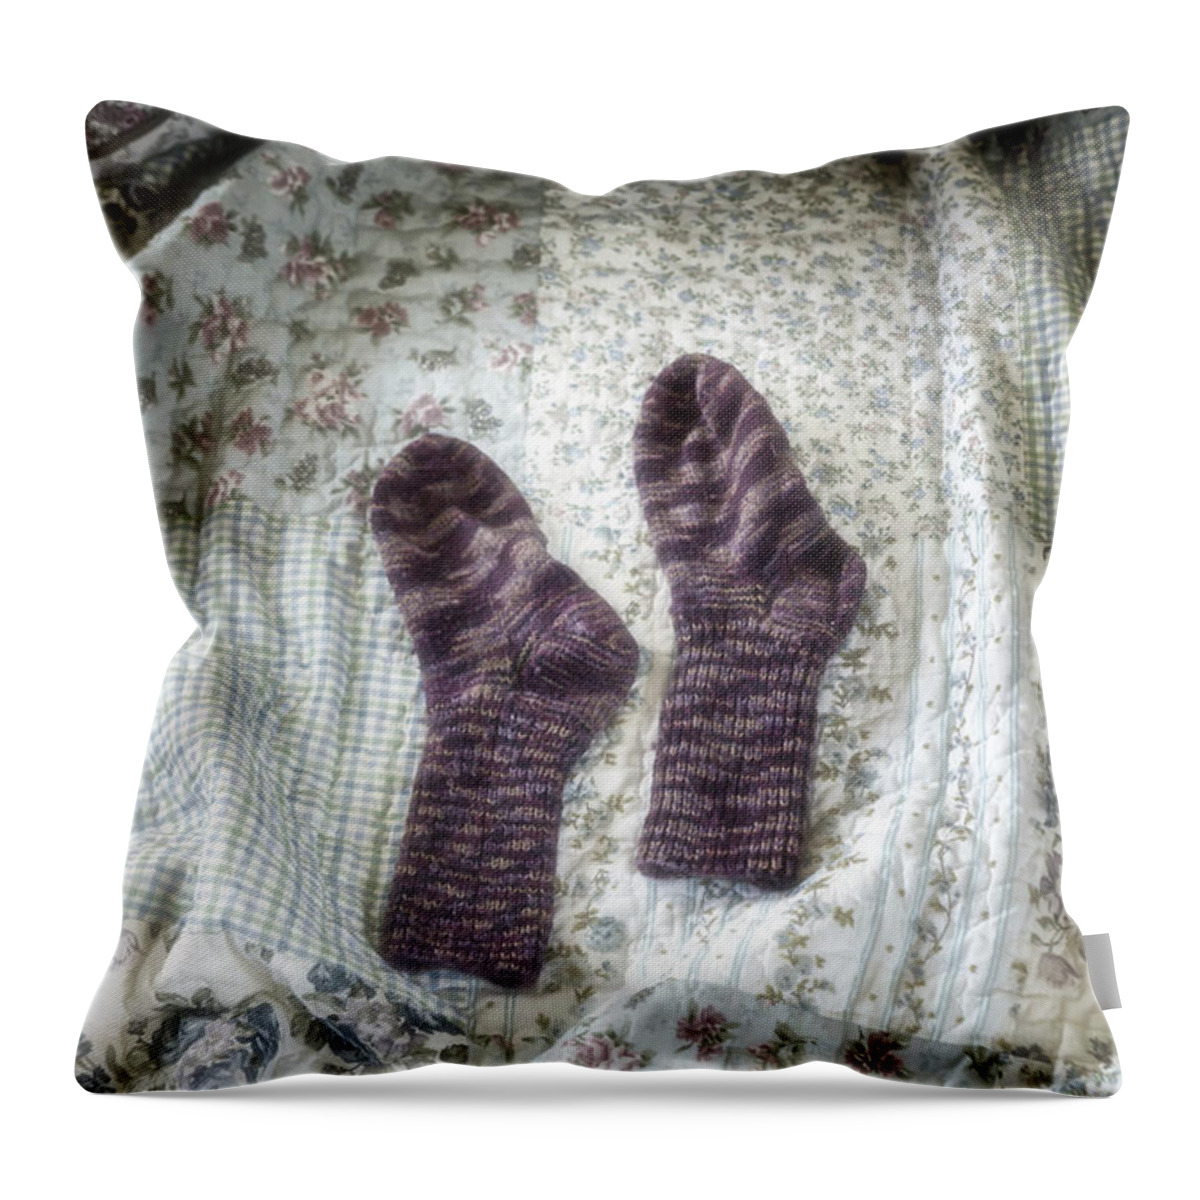 Hand-knitted Throw Pillow featuring the photograph Woollen Socks #2 by Joana Kruse